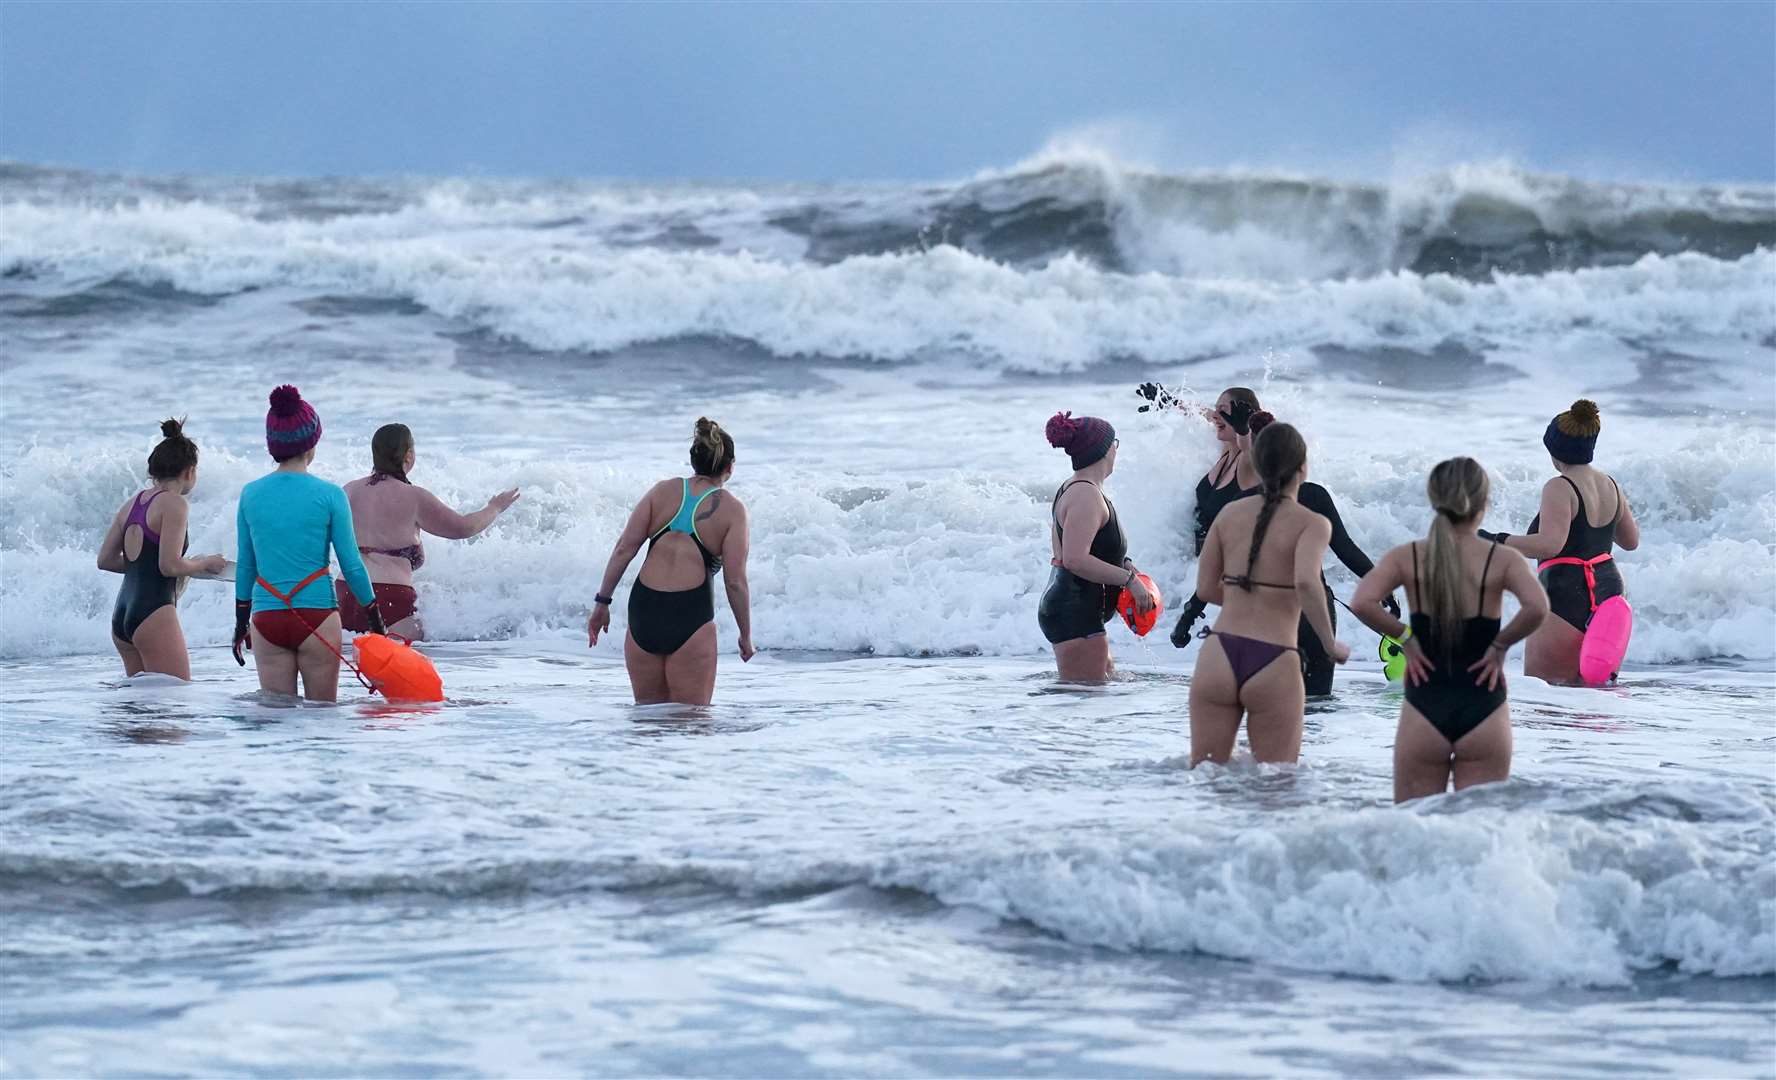 Women swimmers brave freezing conditions as they gather to celebrate International Women’s Day at King Edward’s Bay, near Tynemouth (Owen Humphreys/PA)